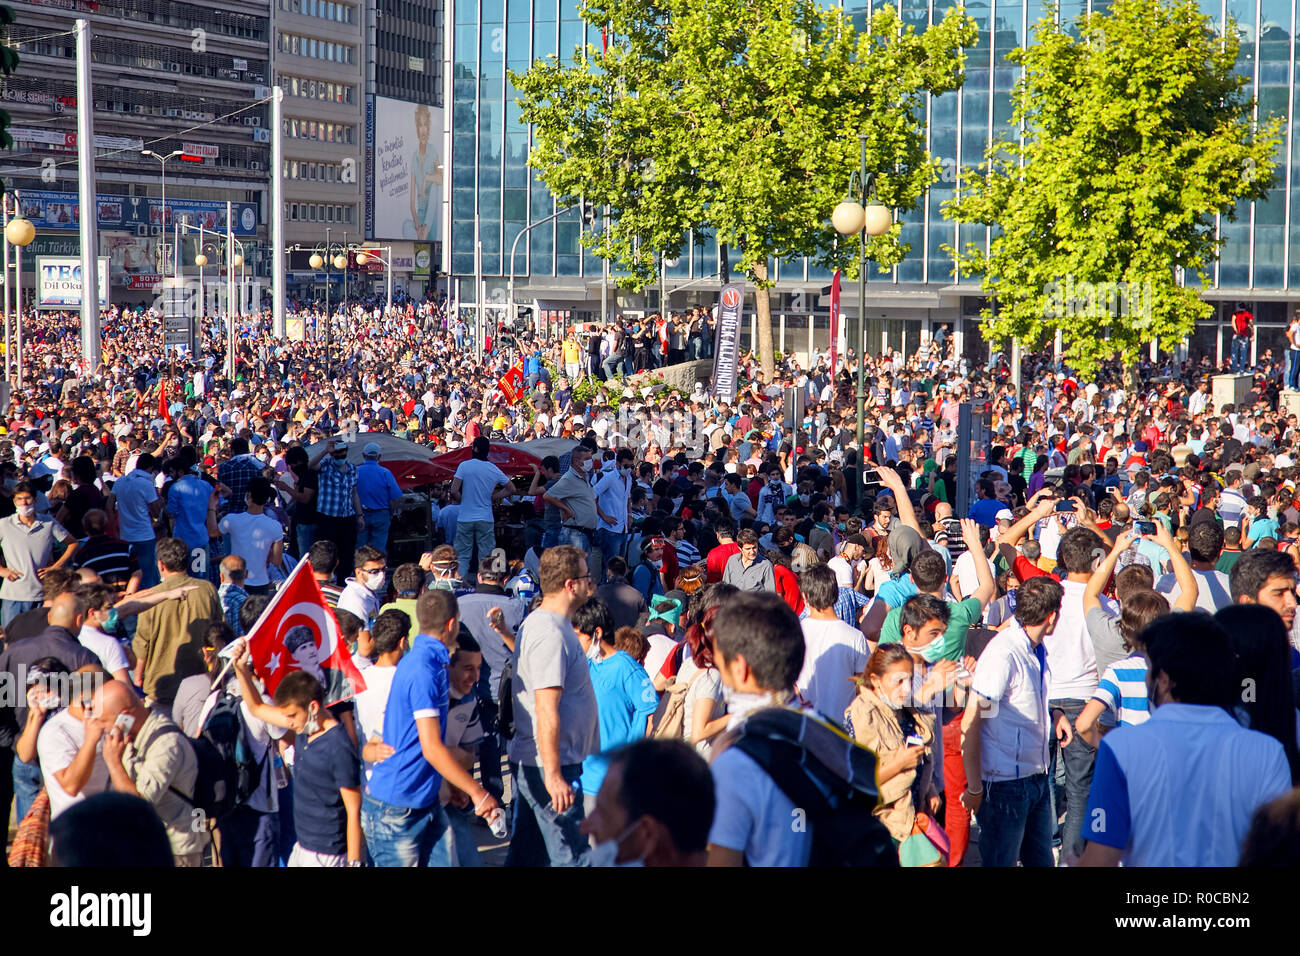 Kizilay square occupied by the discontent anti-government protesters during Gezi park protests in Ankara, Turkey. Stock Photo